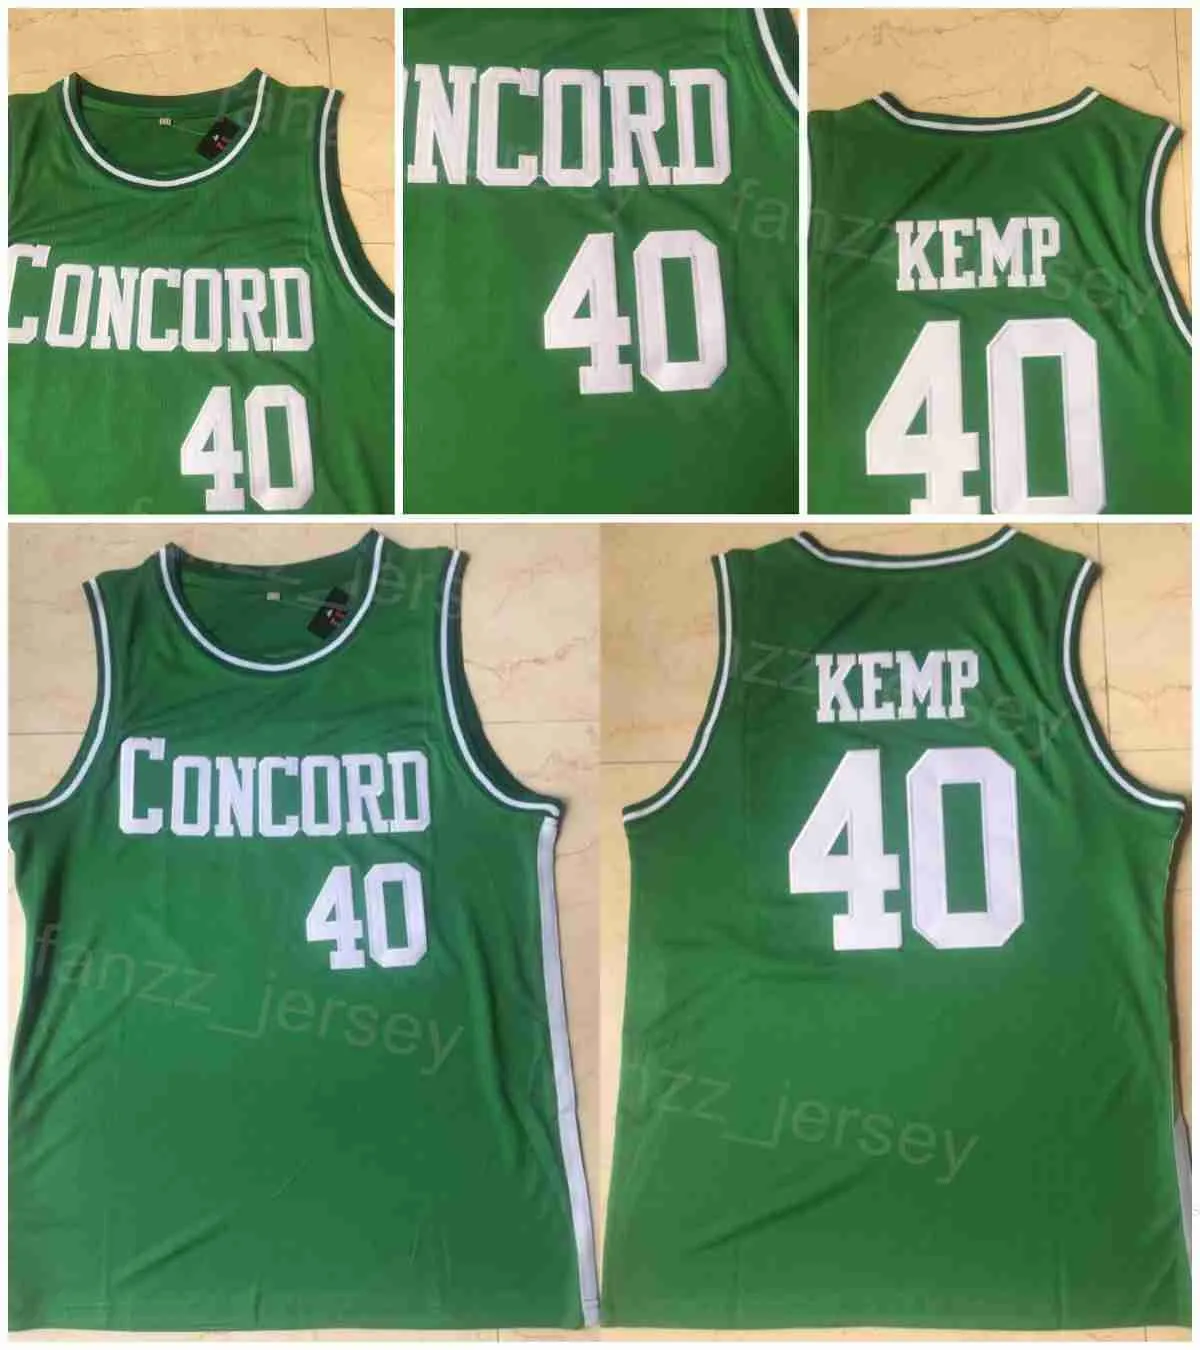 Concord Academy High School 40 Shawn Kemp Jersey Basketball College University Shirt All Stitched Team Color Green For Sport Fans Breathable Pure Cotton Man NCAA